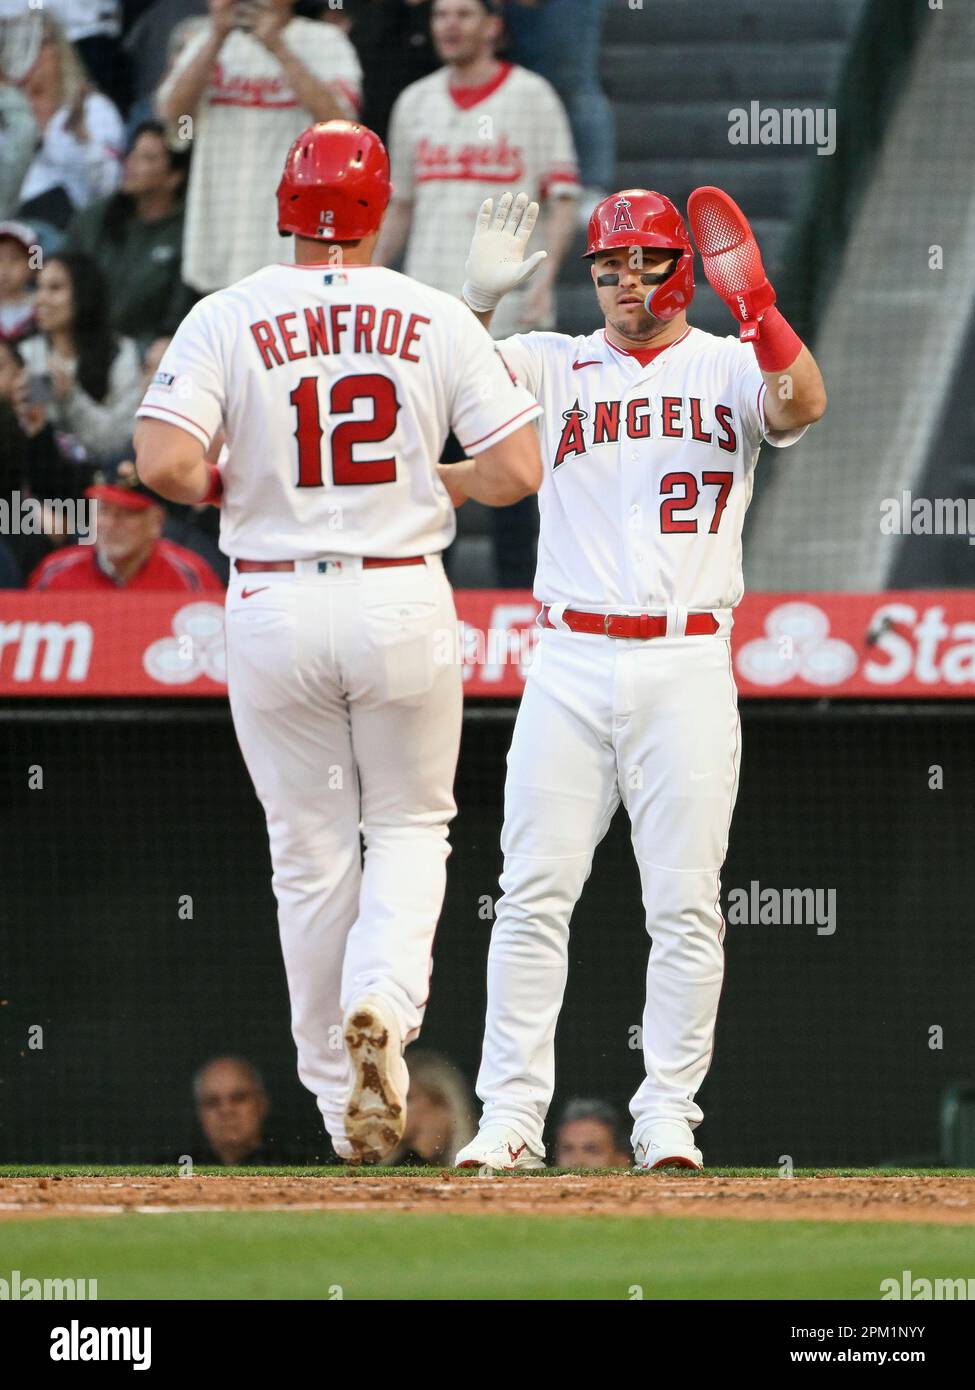 ANAHEIM, CA - APRIL 10: Los Angeles Angels center fielder Mike Trout (27)  greets right fielder Hunter Renfroe (12) at the plate after both scored on  a Angels hit in the first